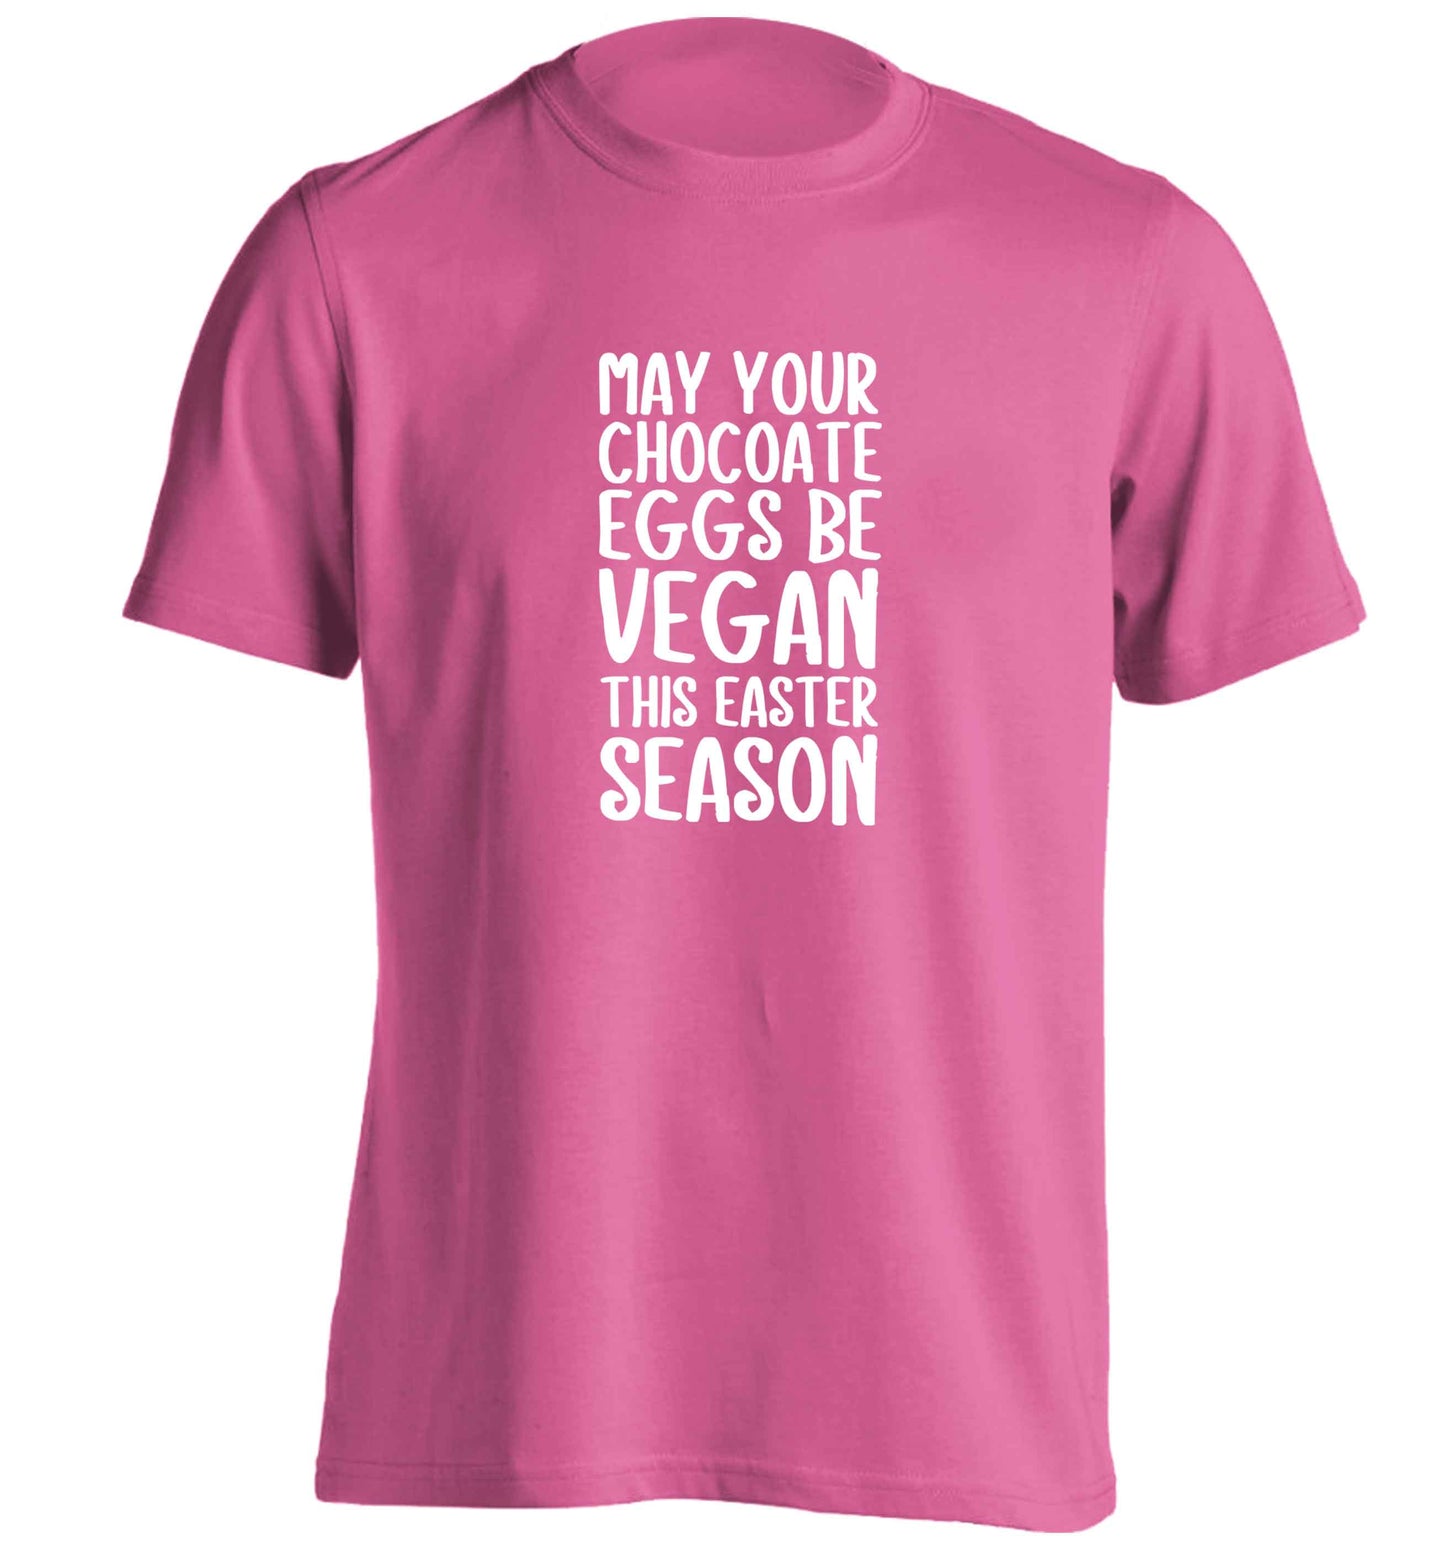 Easter bunny approved! Vegans will love this easter themed adults unisex pink Tshirt 2XL